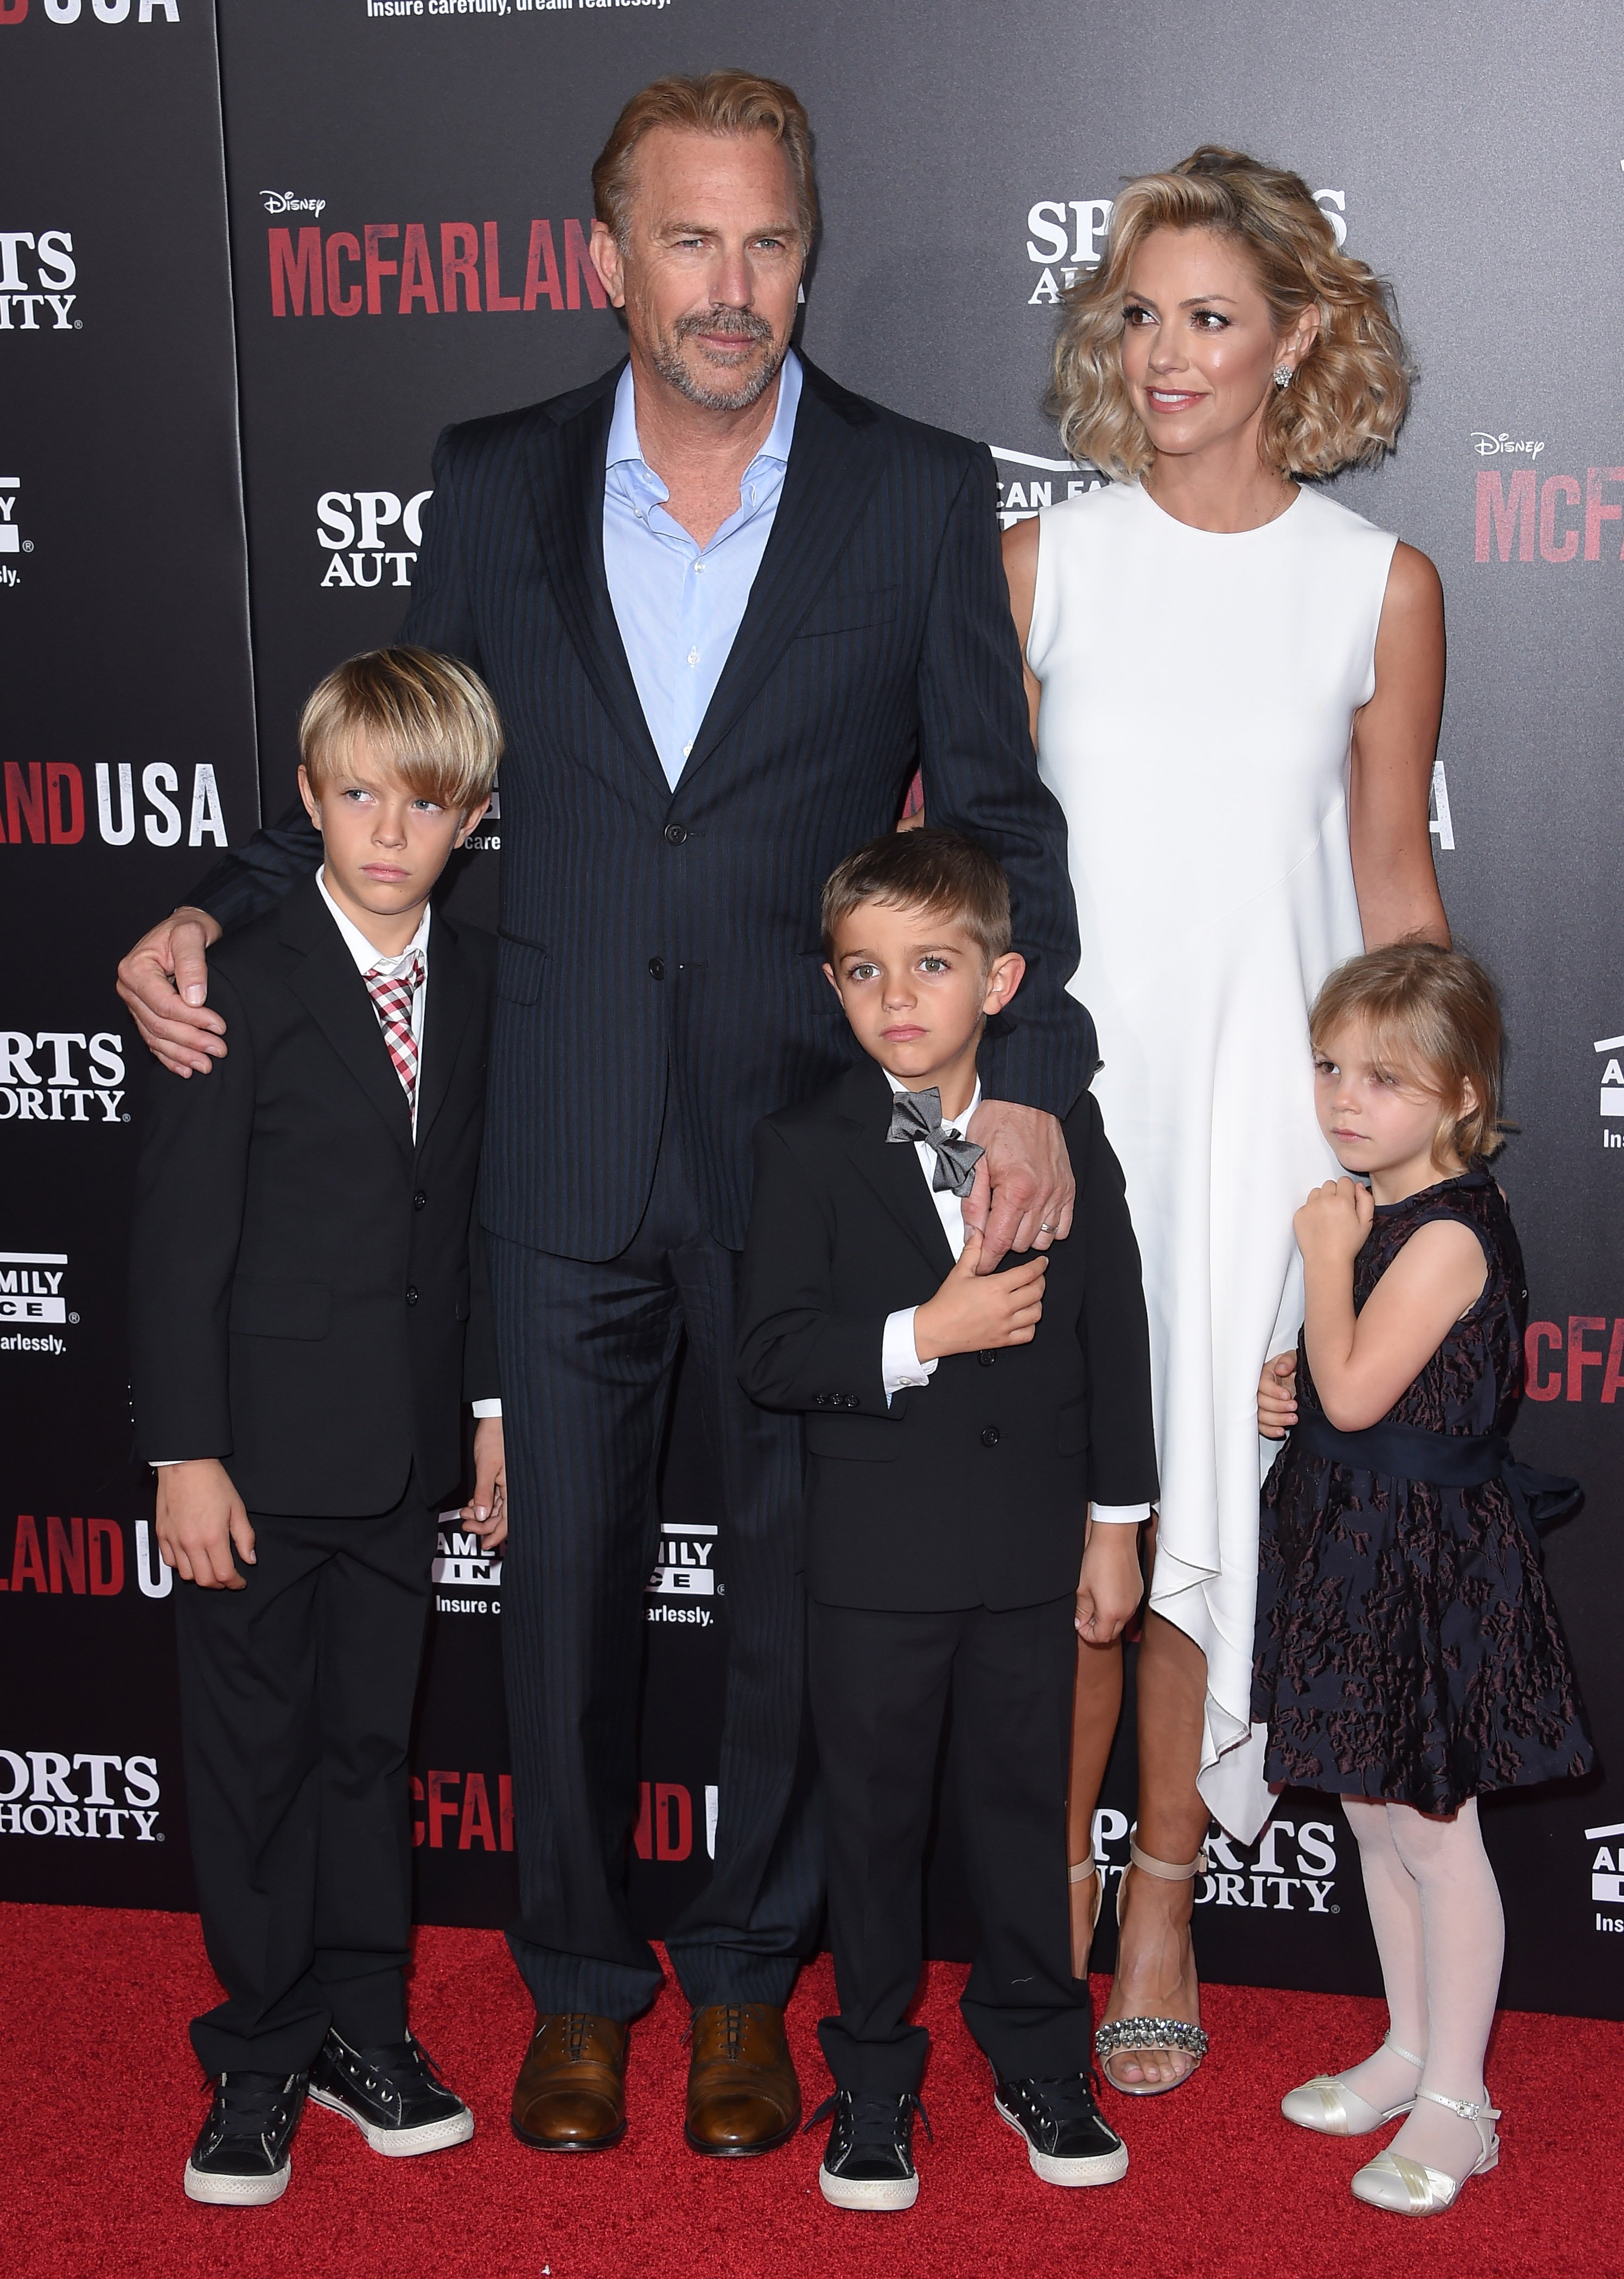 Kevin Costner, his wife Christine Baumgartner, and their children Grace Avery, Hayes Logan, and Cayden Wyatt Costner at the world premiere of "McFarland, USA" on February 9, 2015, in Hollywood, California | Source: Getty Images